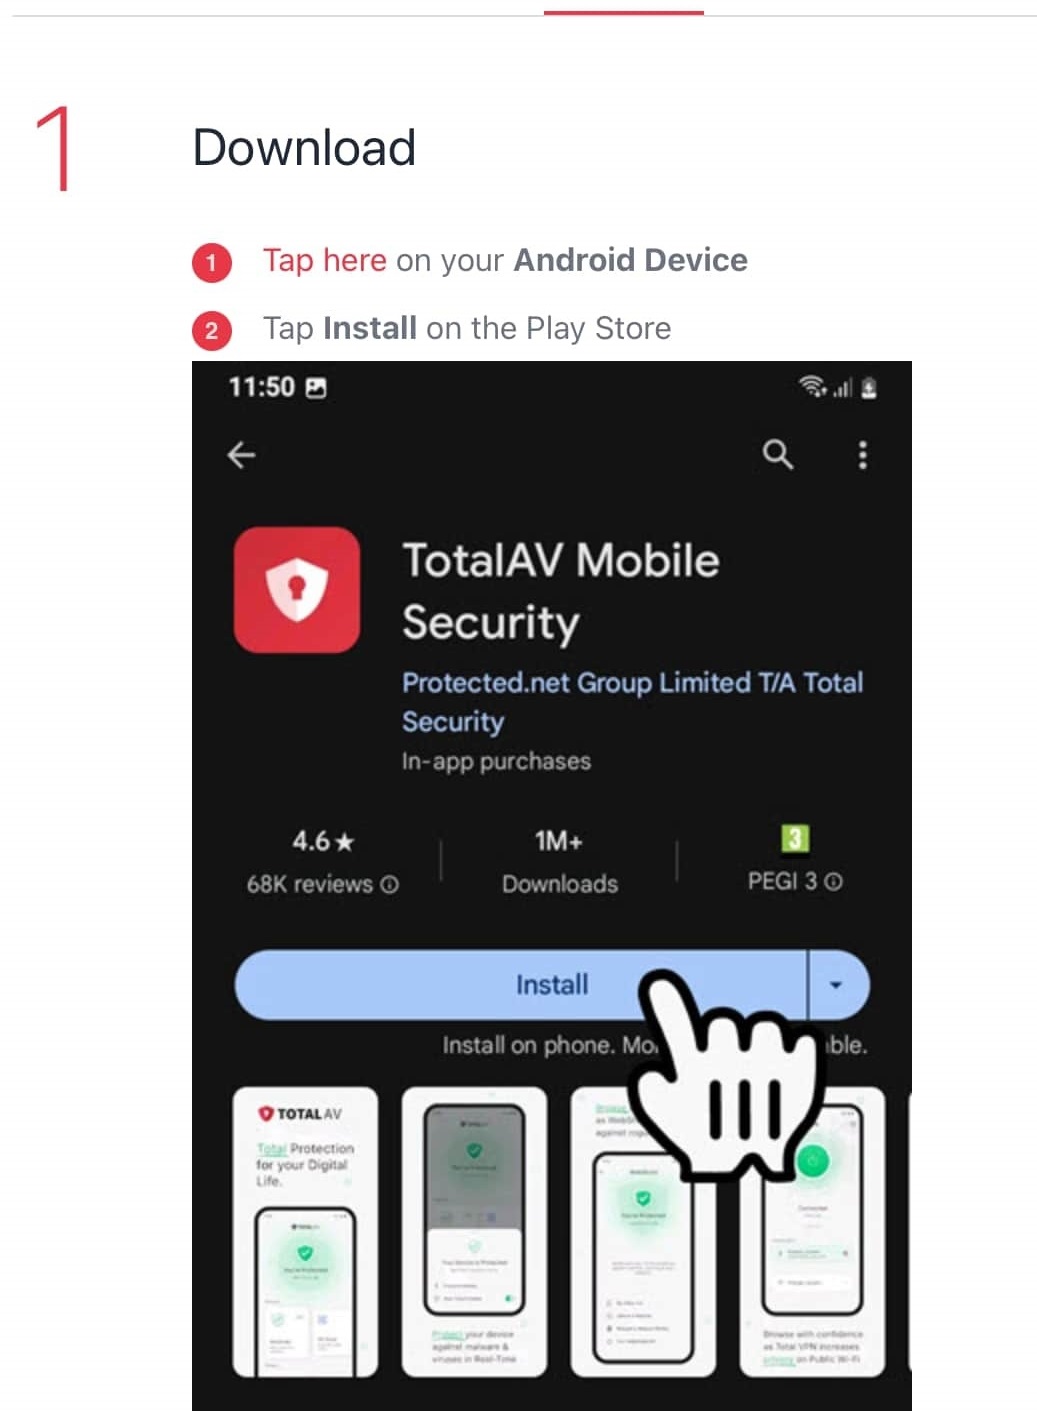 Anti Spy (SpyWare Removal) - Apps on Google Play